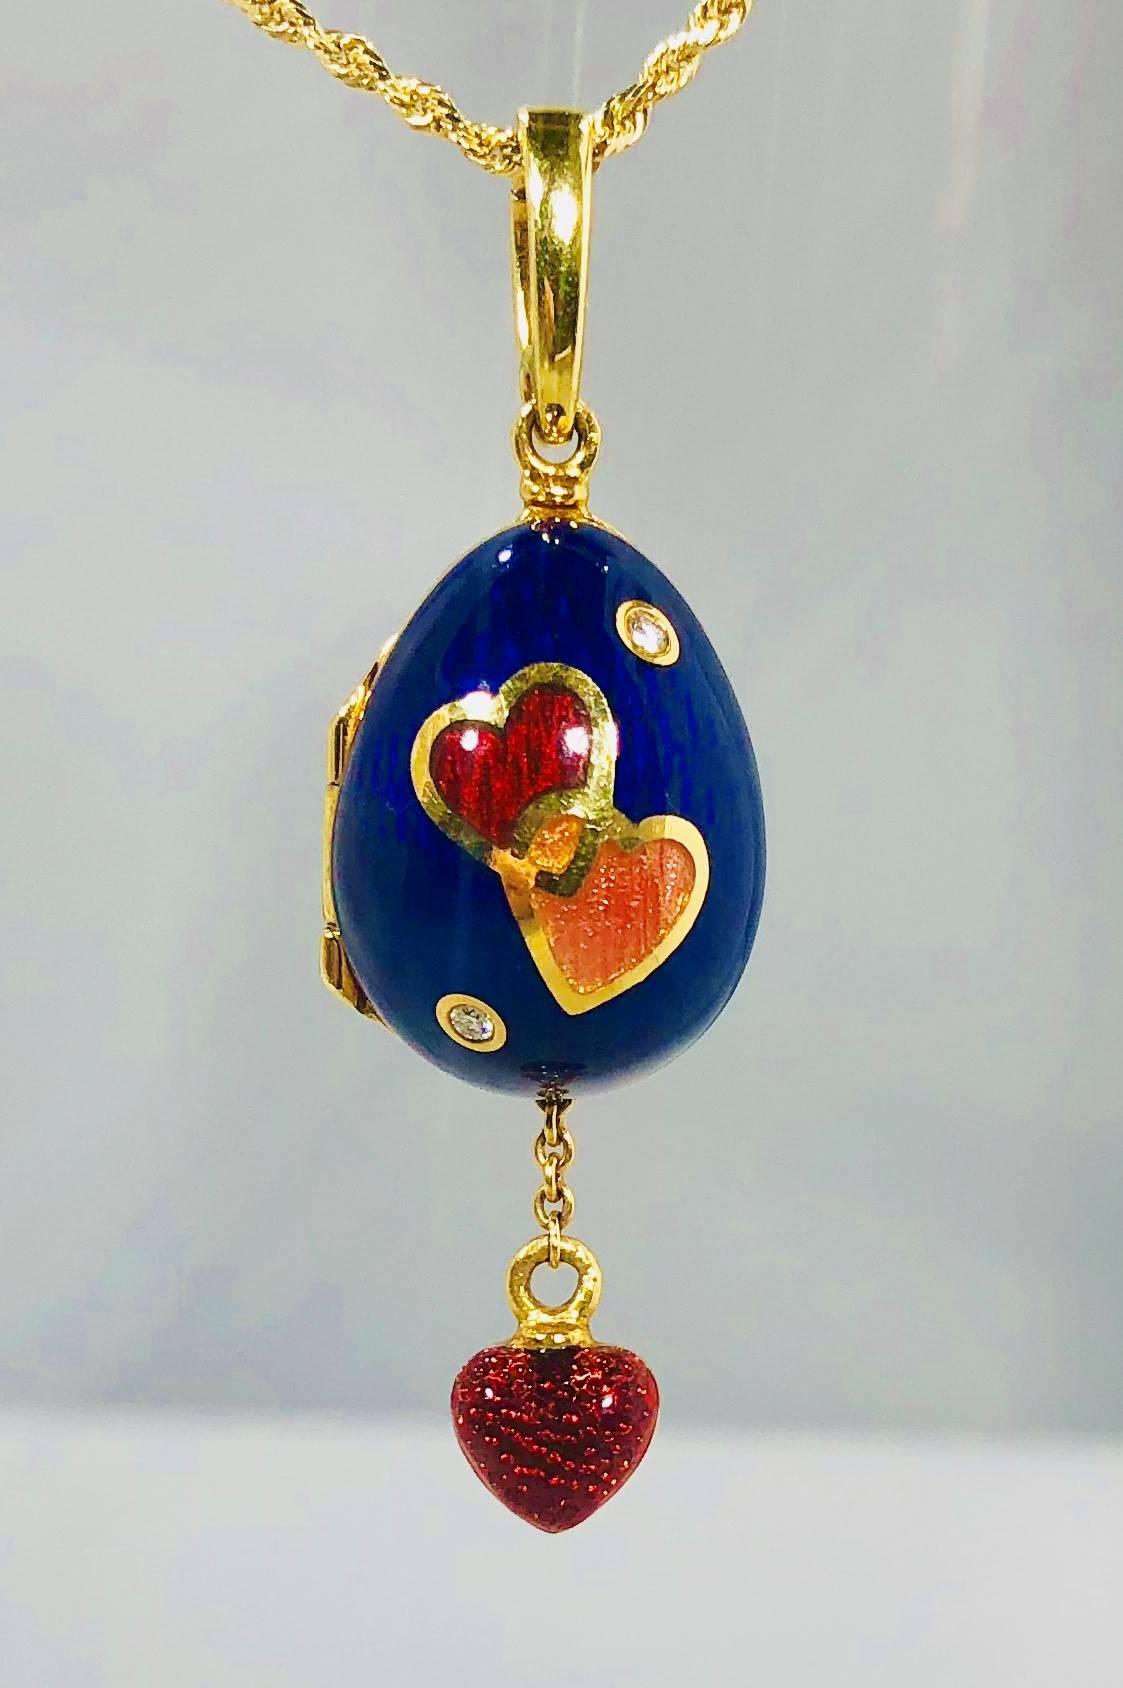 Faberge by Victor Mayer 18 karat and enamel diamond egg locket pendant. This piece is created in 18 karat yellow gold and weighs 13.7 grams/ 8.7 dwt. There are two round cut diamonds equaling .03 carats total weight, Color E-F Clarity VVS2. This